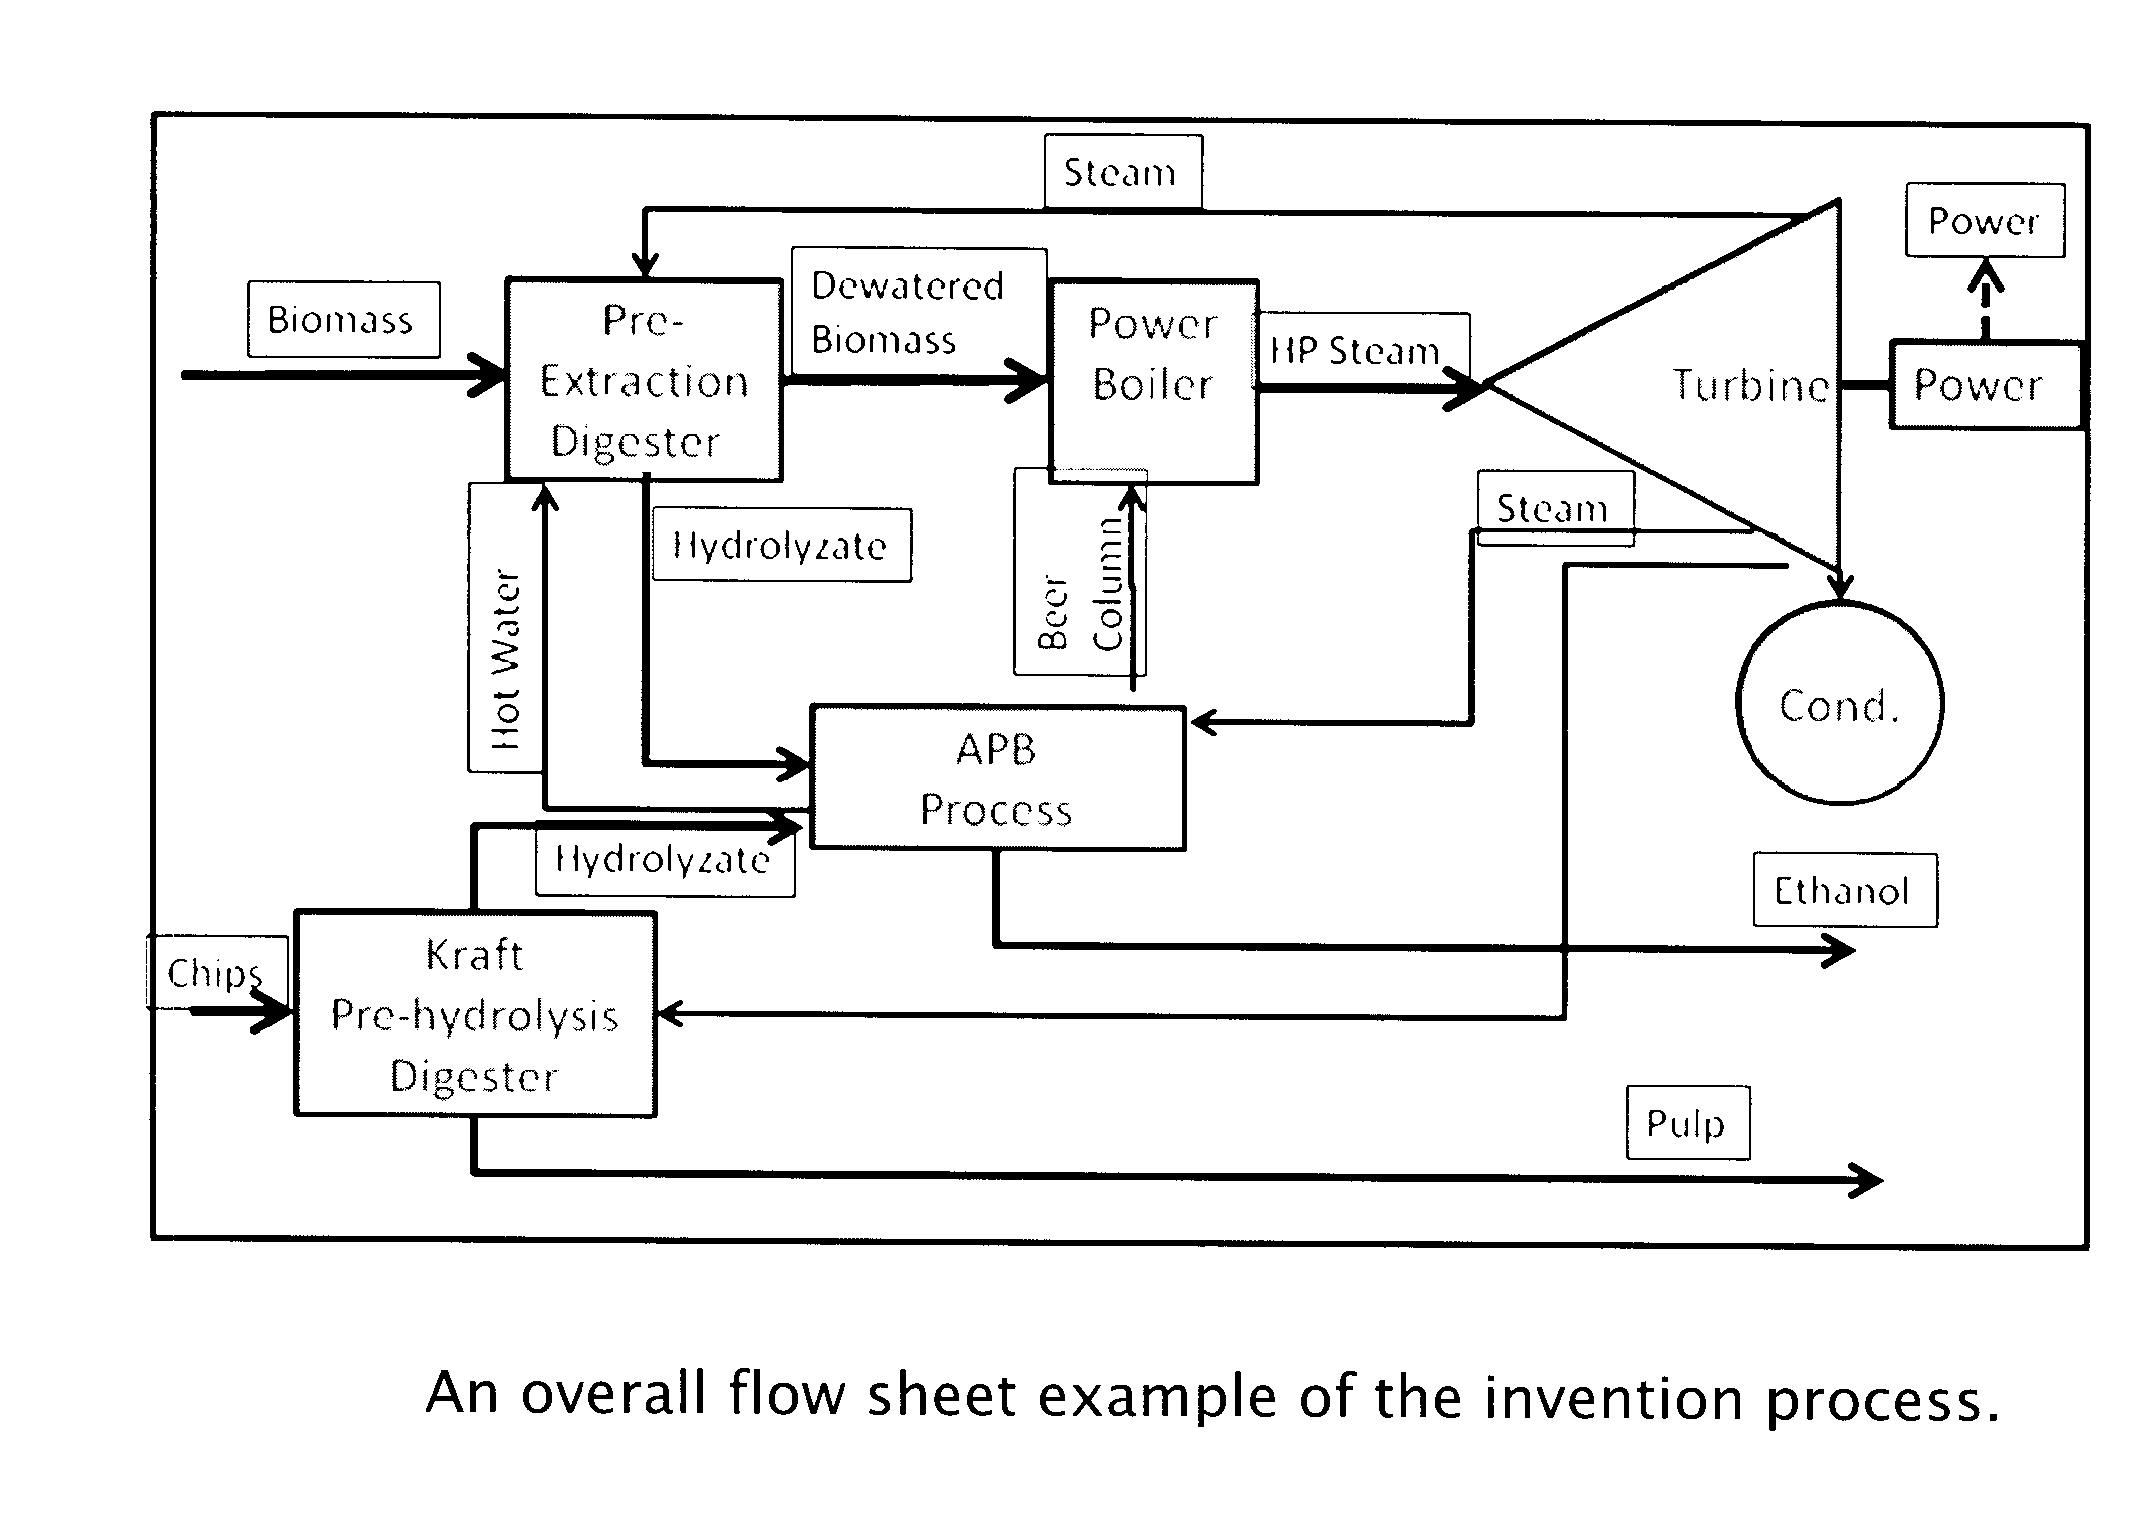 Process for producing alcohol and other bioproducts from biomass extracts in a kraft pulp mill